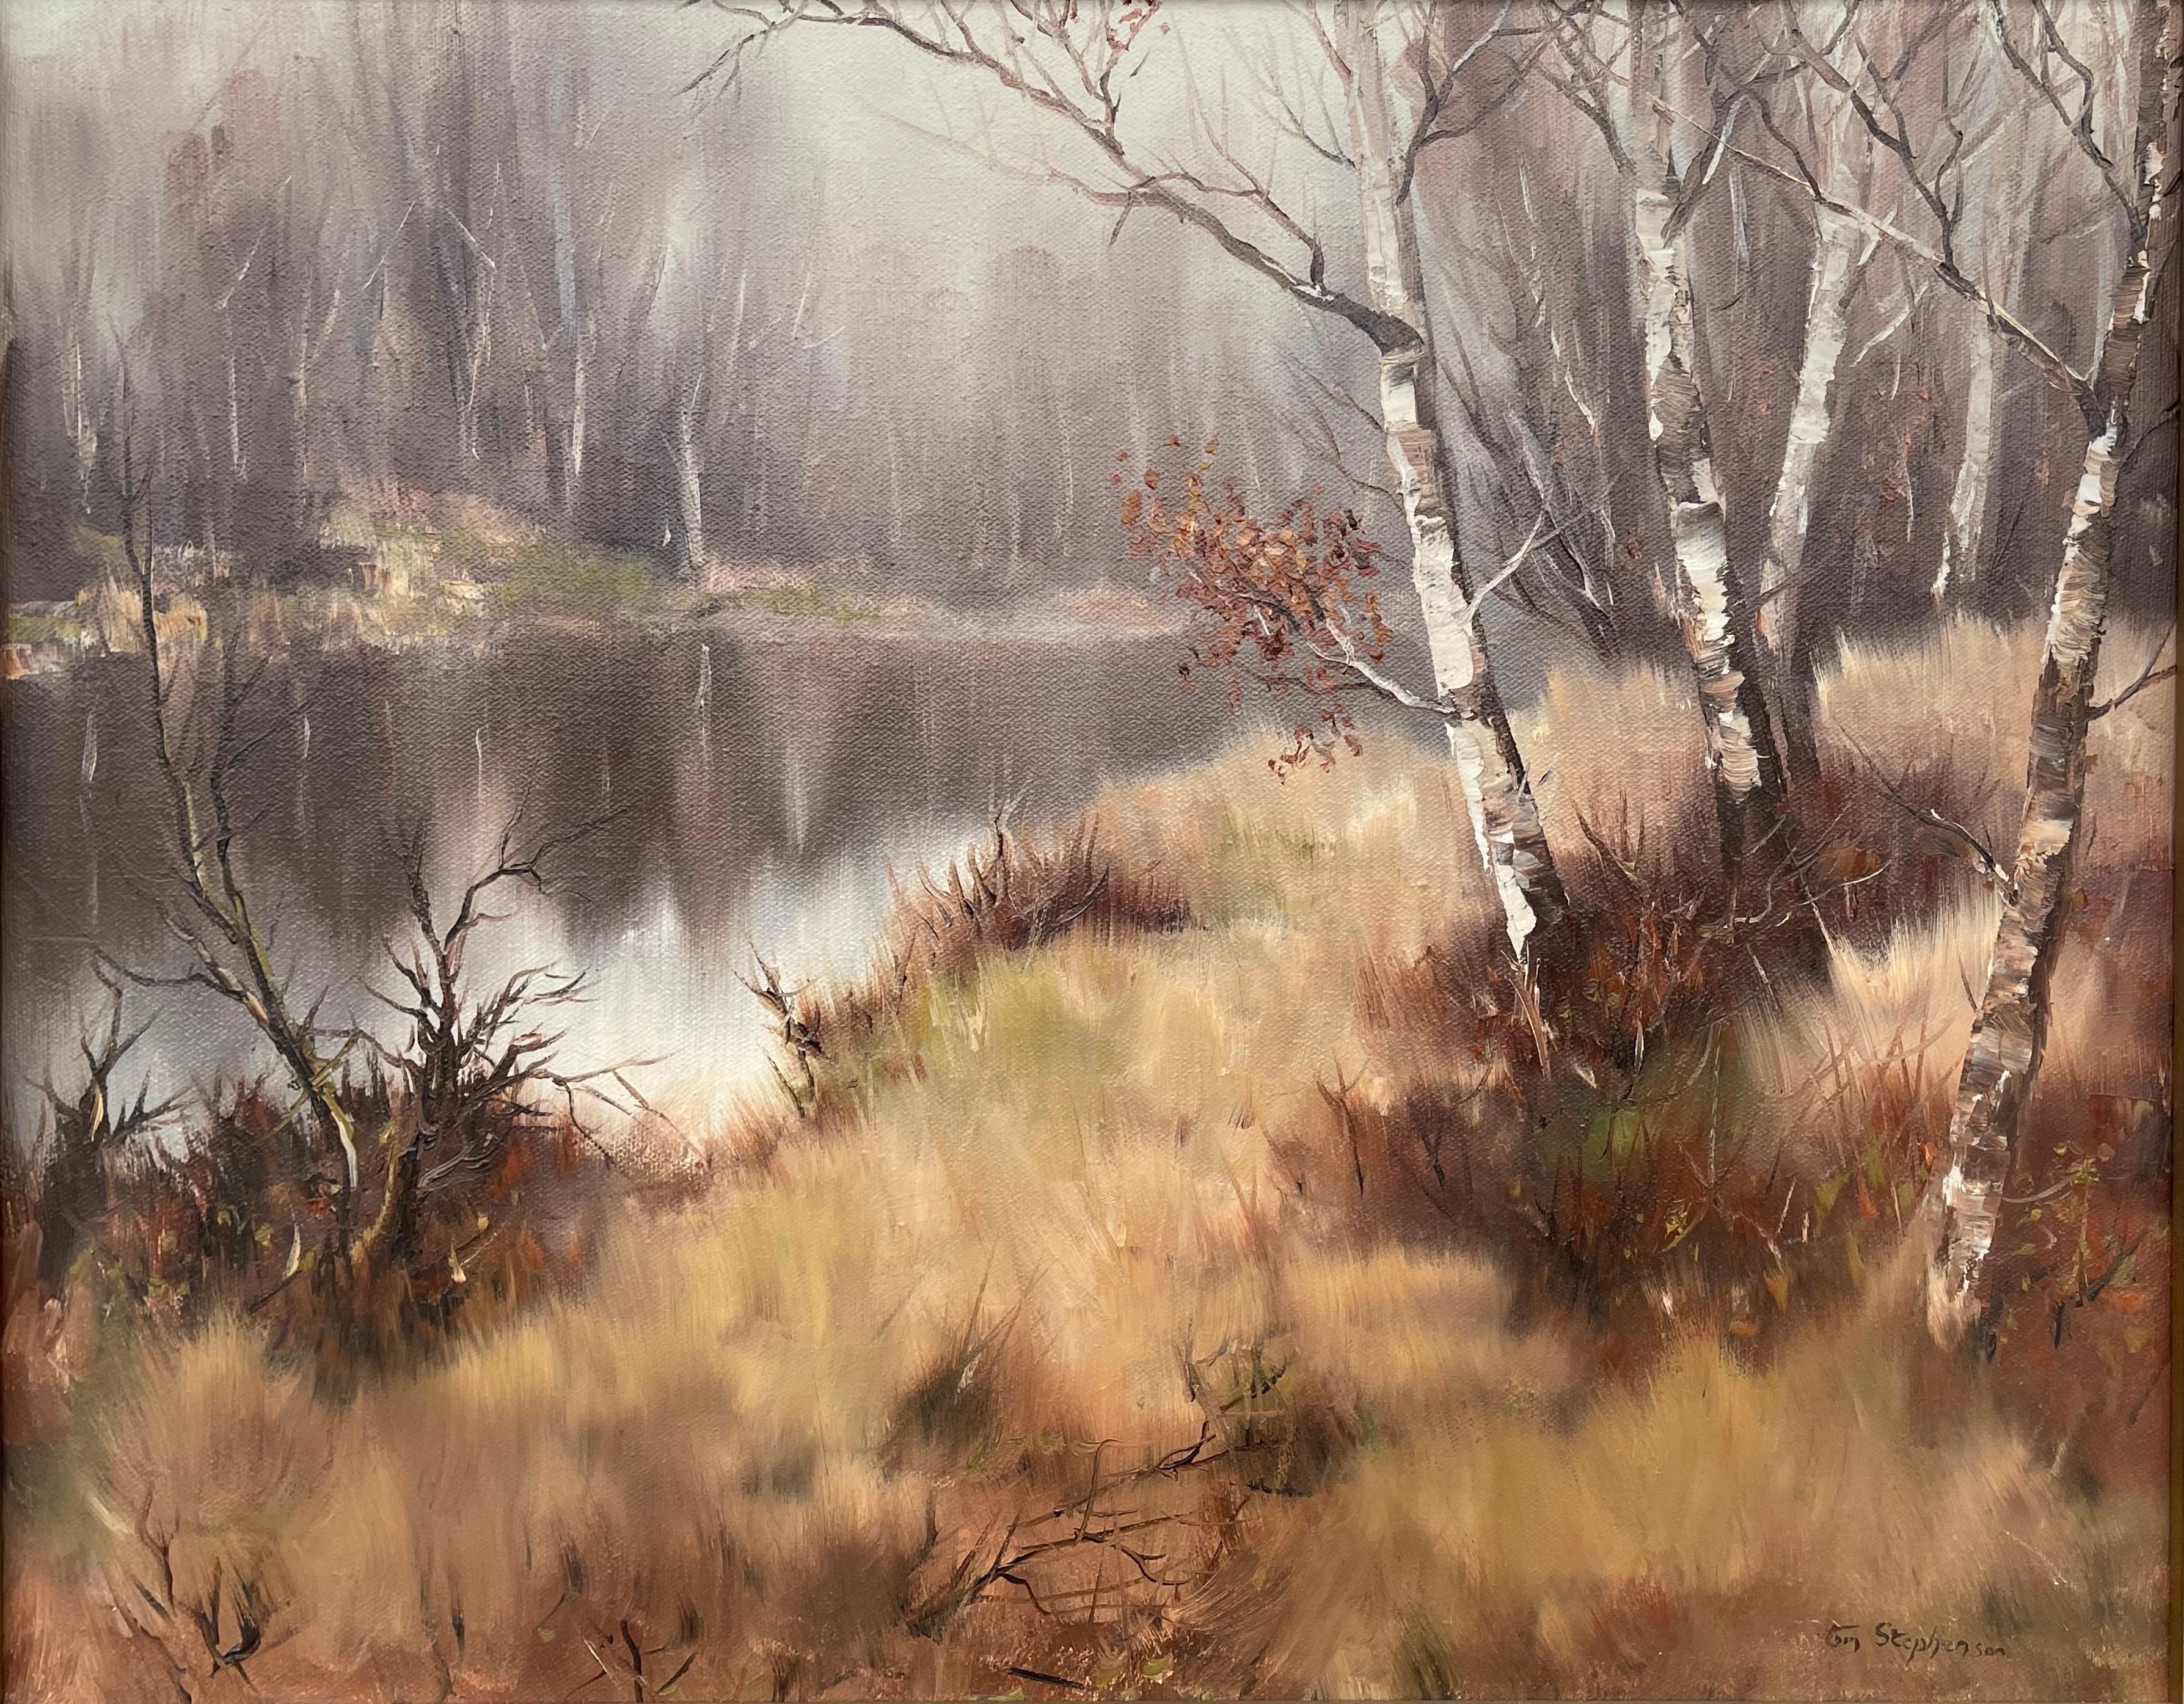 Oil Painting of River Landscape in Ireland Countryside by Modern Irish Artist - Brown Figurative Painting by Tom Stephenson